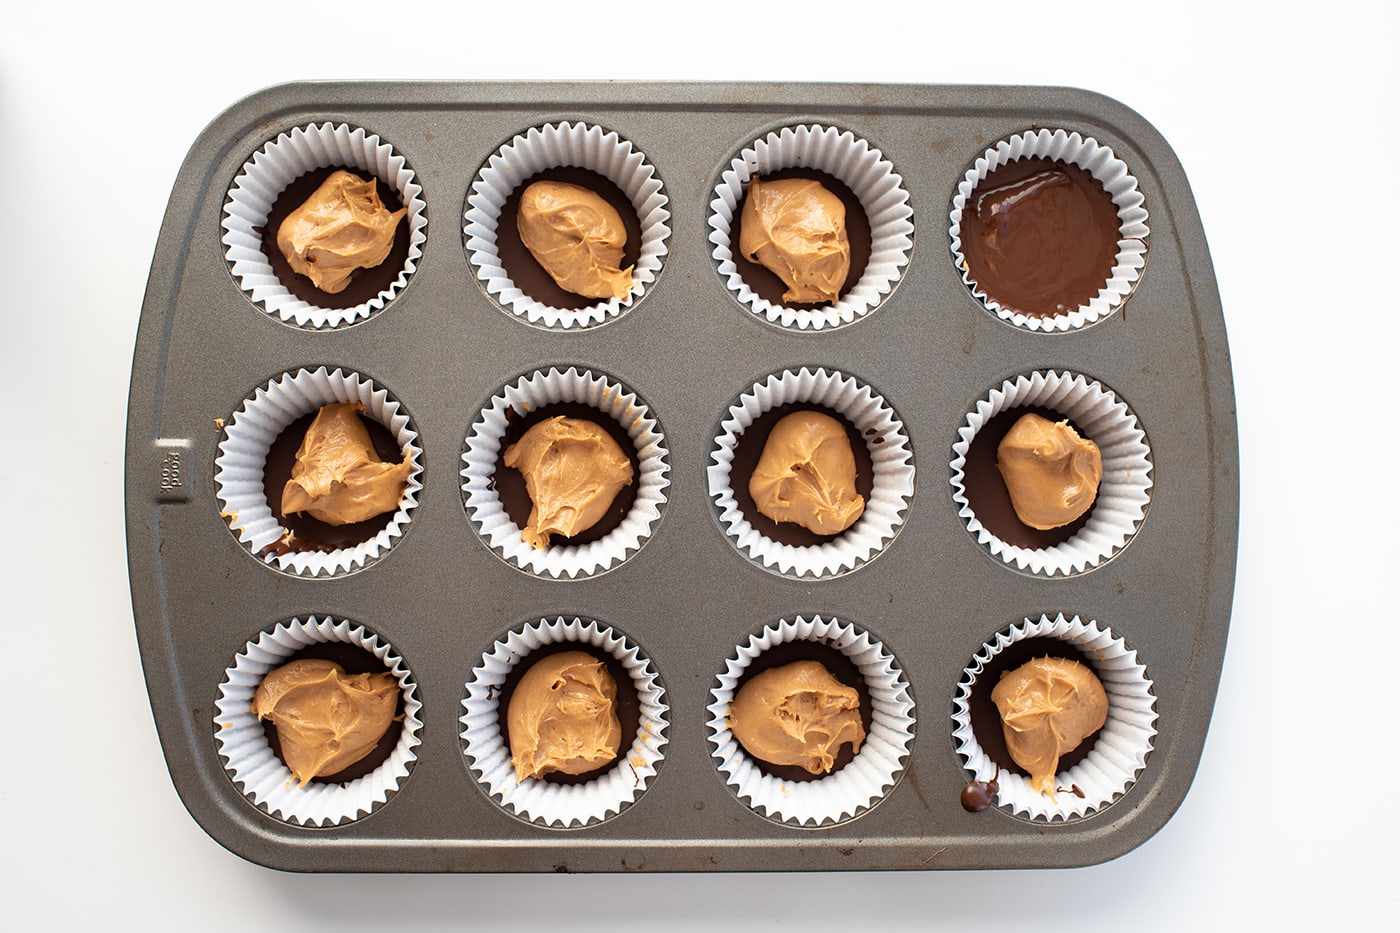 Homemade Reese's Peanut Butter Cups Recipe